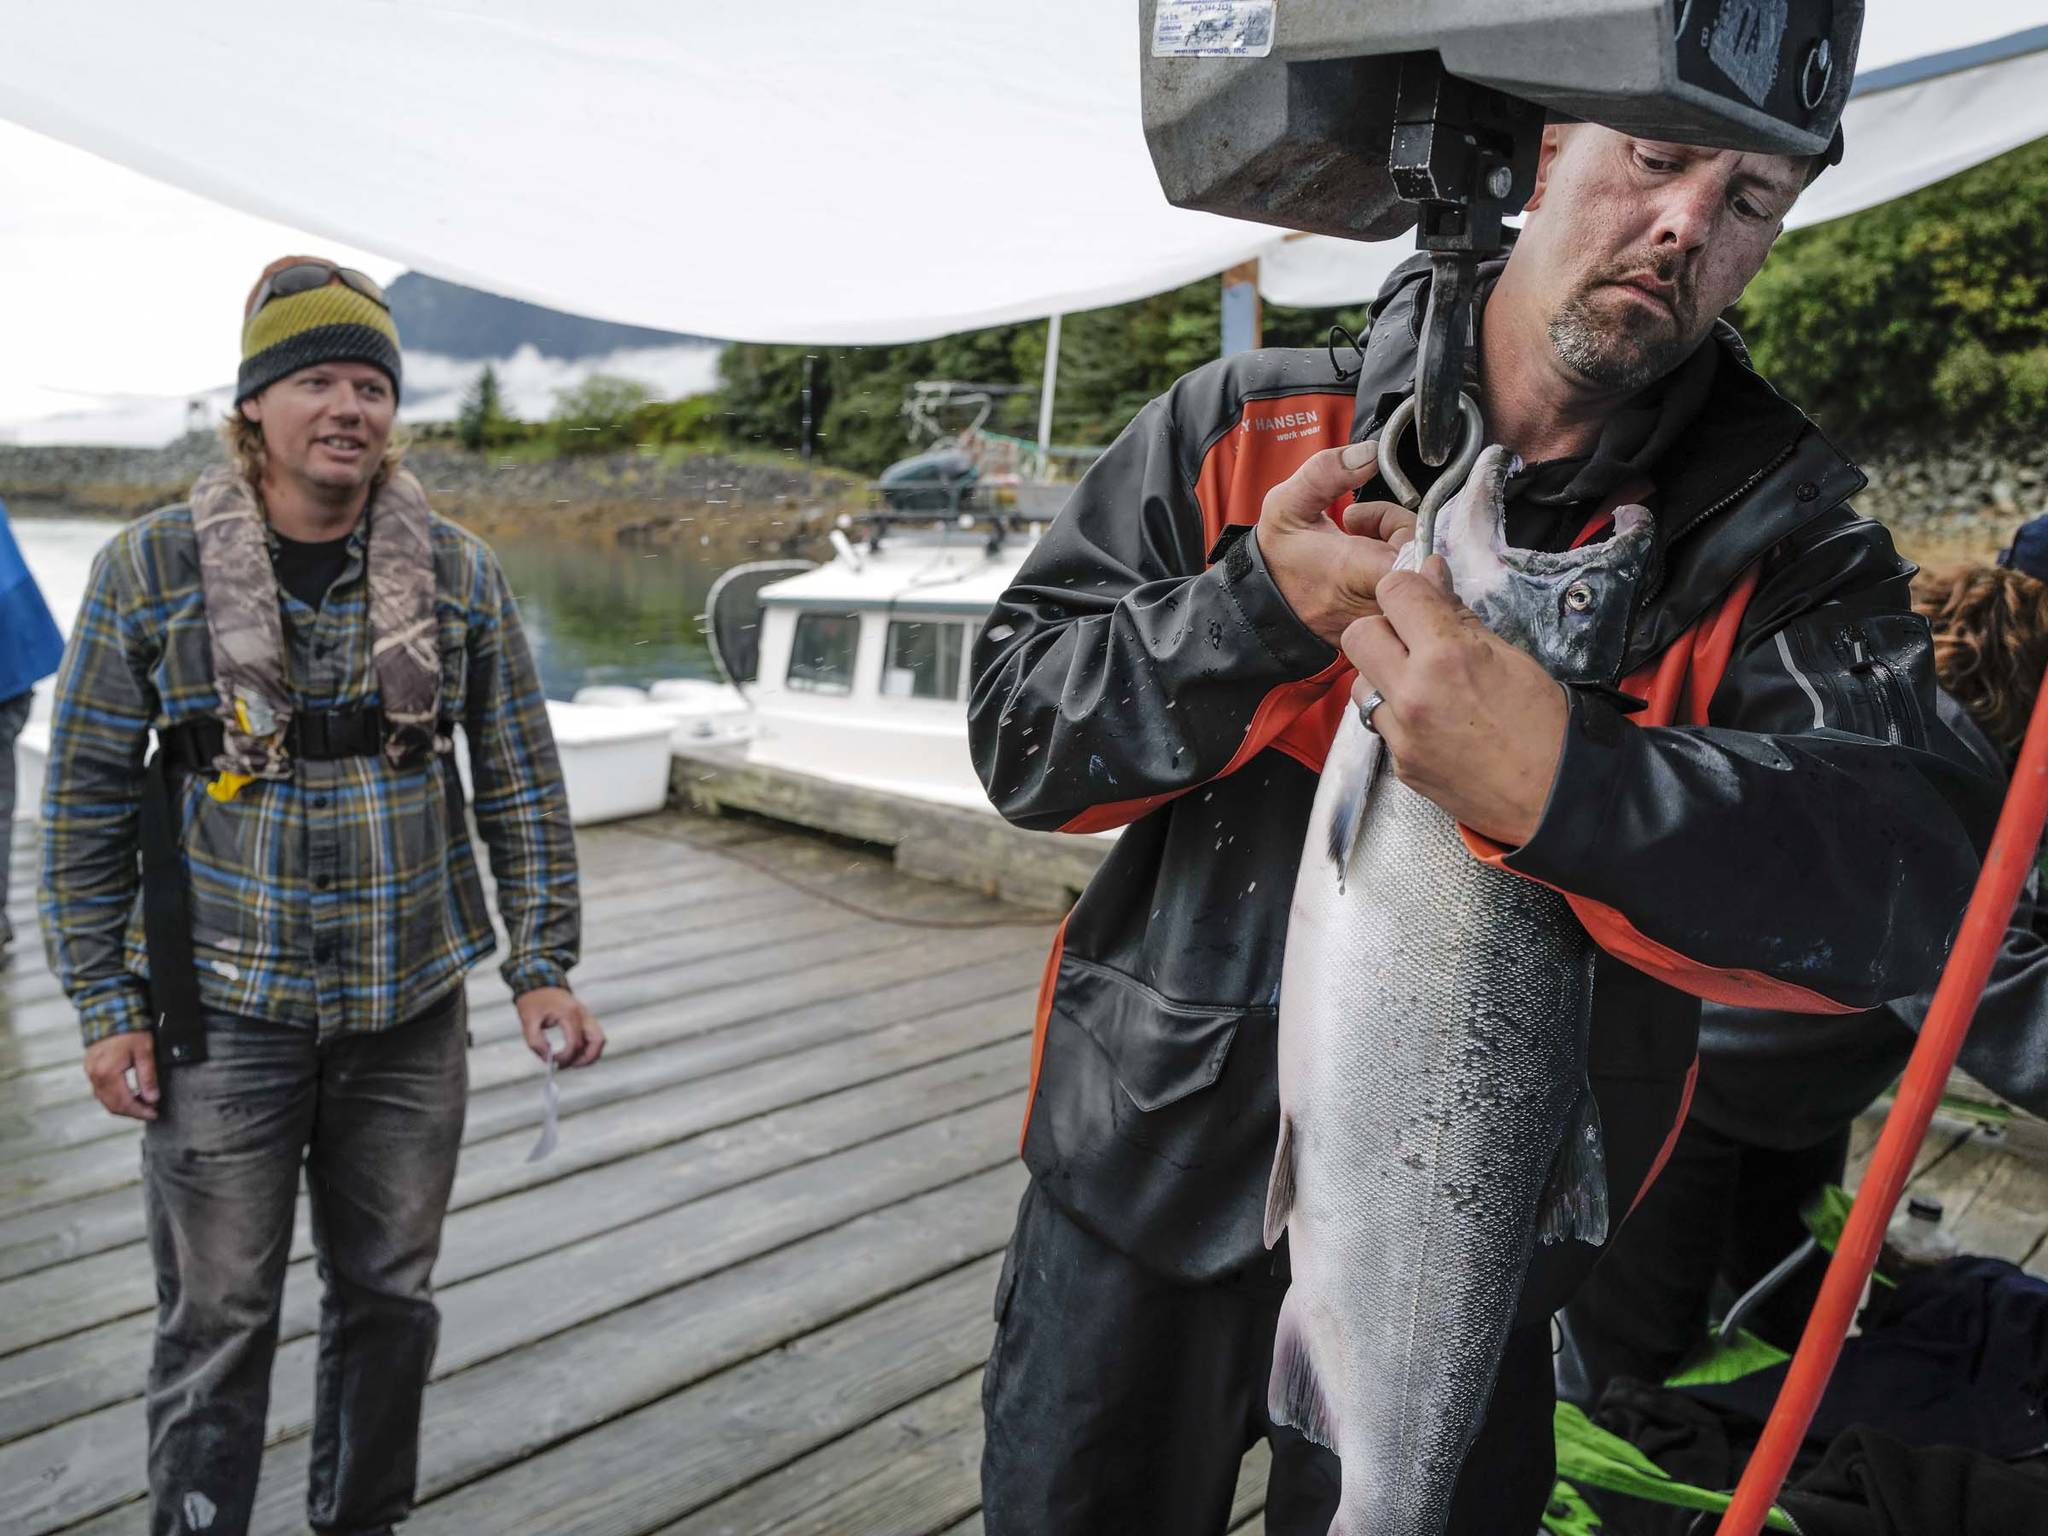 Nathan Wilson, left, watches volunteer Jonathan Gunstrom weigh his coho at the Mike Pusich Douglas Harbor’s Golden North Salmon Derby station on Friday, Aug. 23, 2019. The fish was in the 10 pound range. (Michael Penn | Juneau Empire)